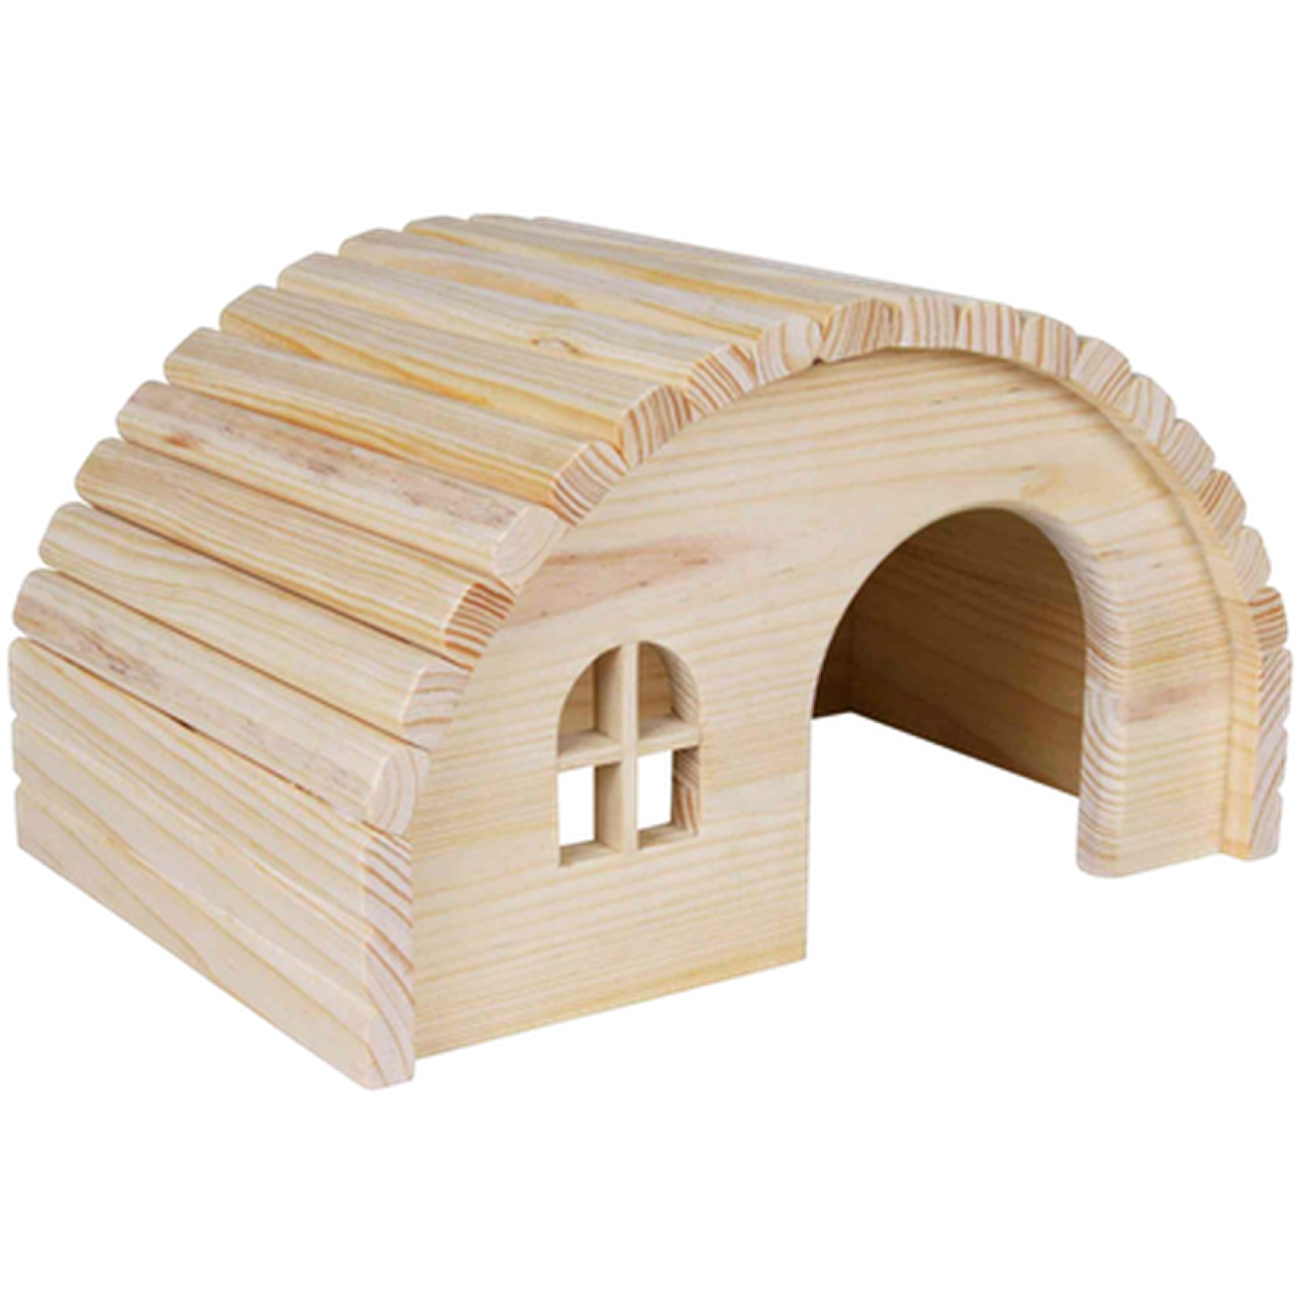 Wooden House For Guinea Pigs Brown 29 x17 x20 cm